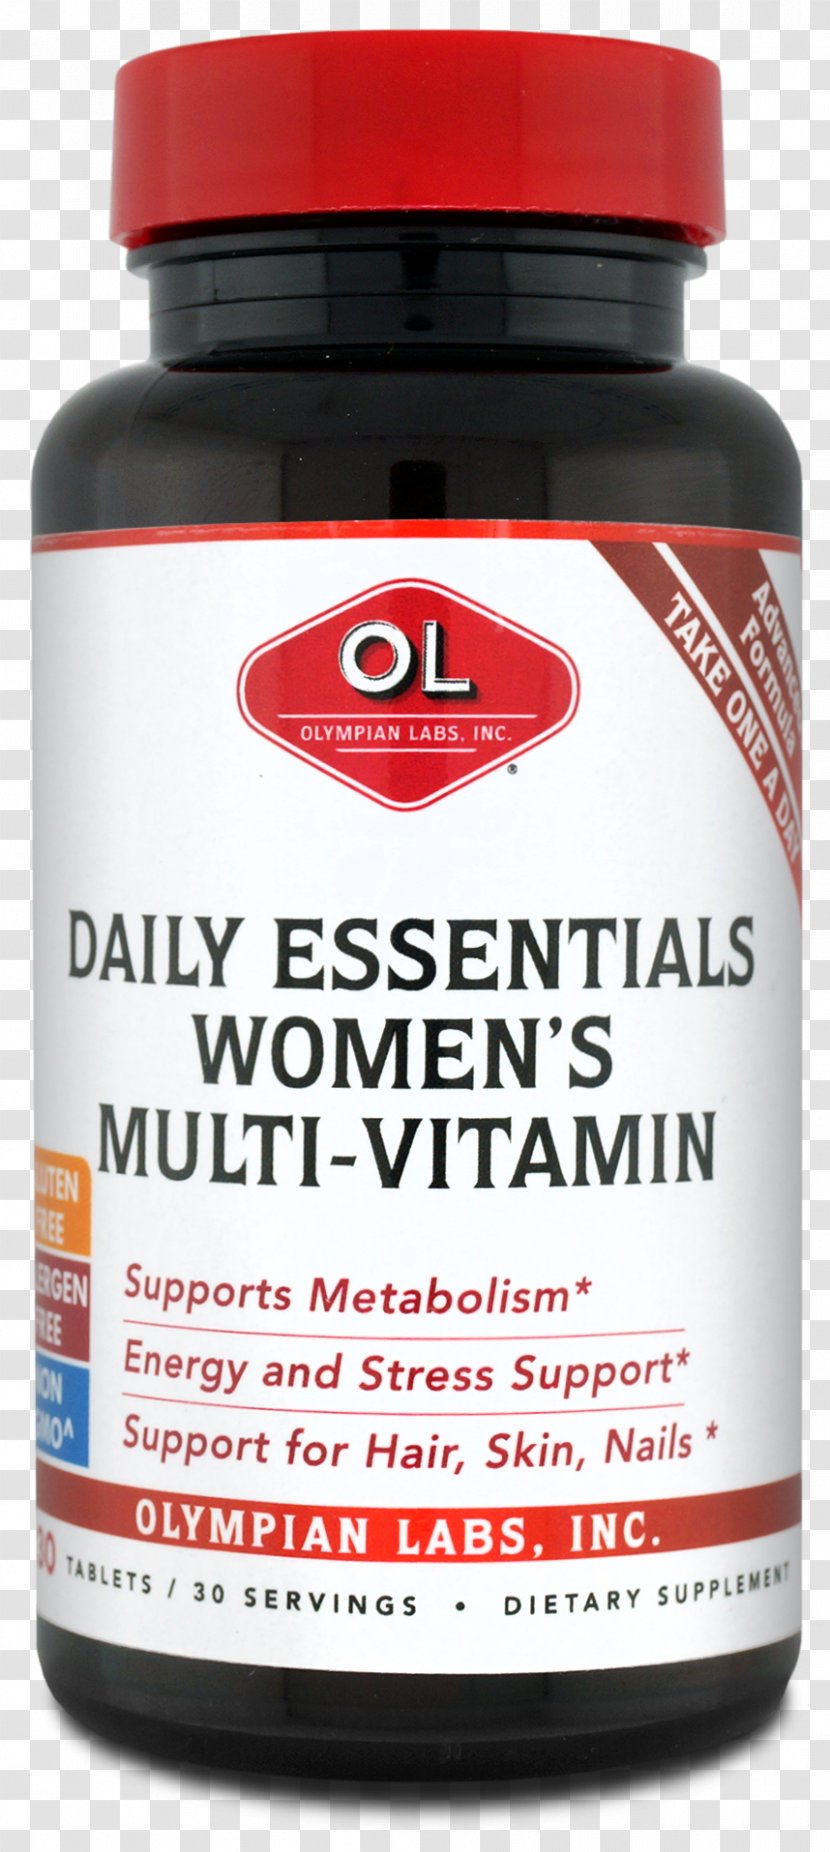 Dietary Supplement Olympian Labs Inc. Daily Essentials Women's Multi-Vitamin Flavor By Bob Holmes, Jonathan Yen (narrator) (9781515966647) Product Labs, - Nail Growth Formula Transparent PNG